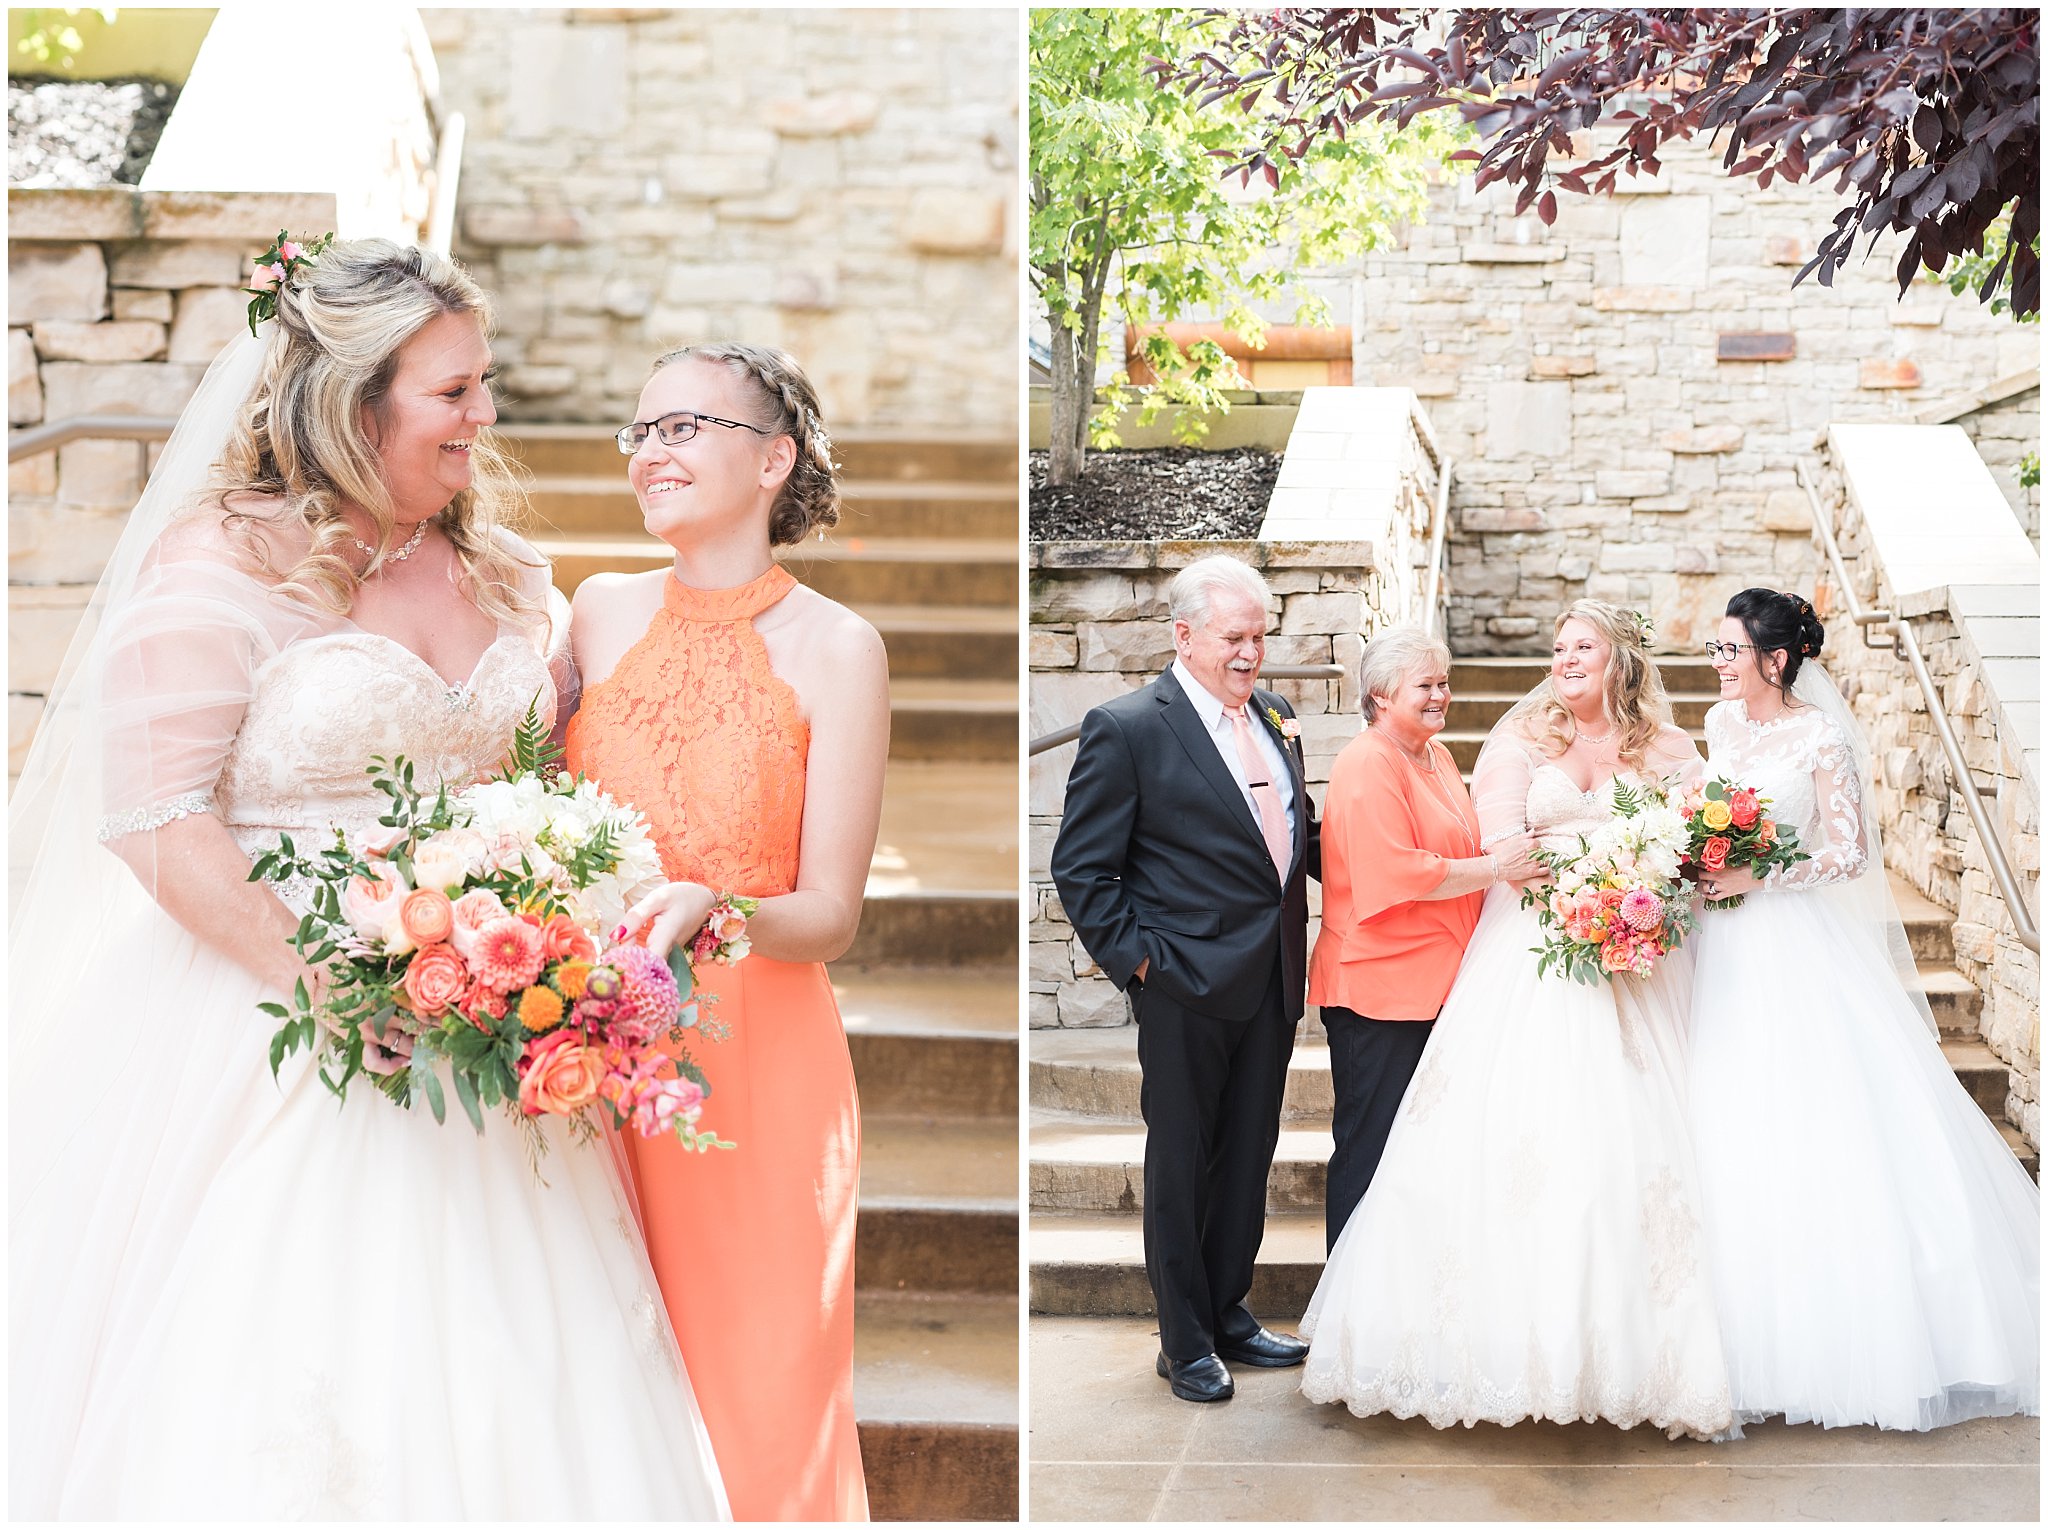 Wedding day family portraits during butterfly wedding with sunset colors | Park City Wedding at the Hyatt Centric | Jessie and Dallin Photography